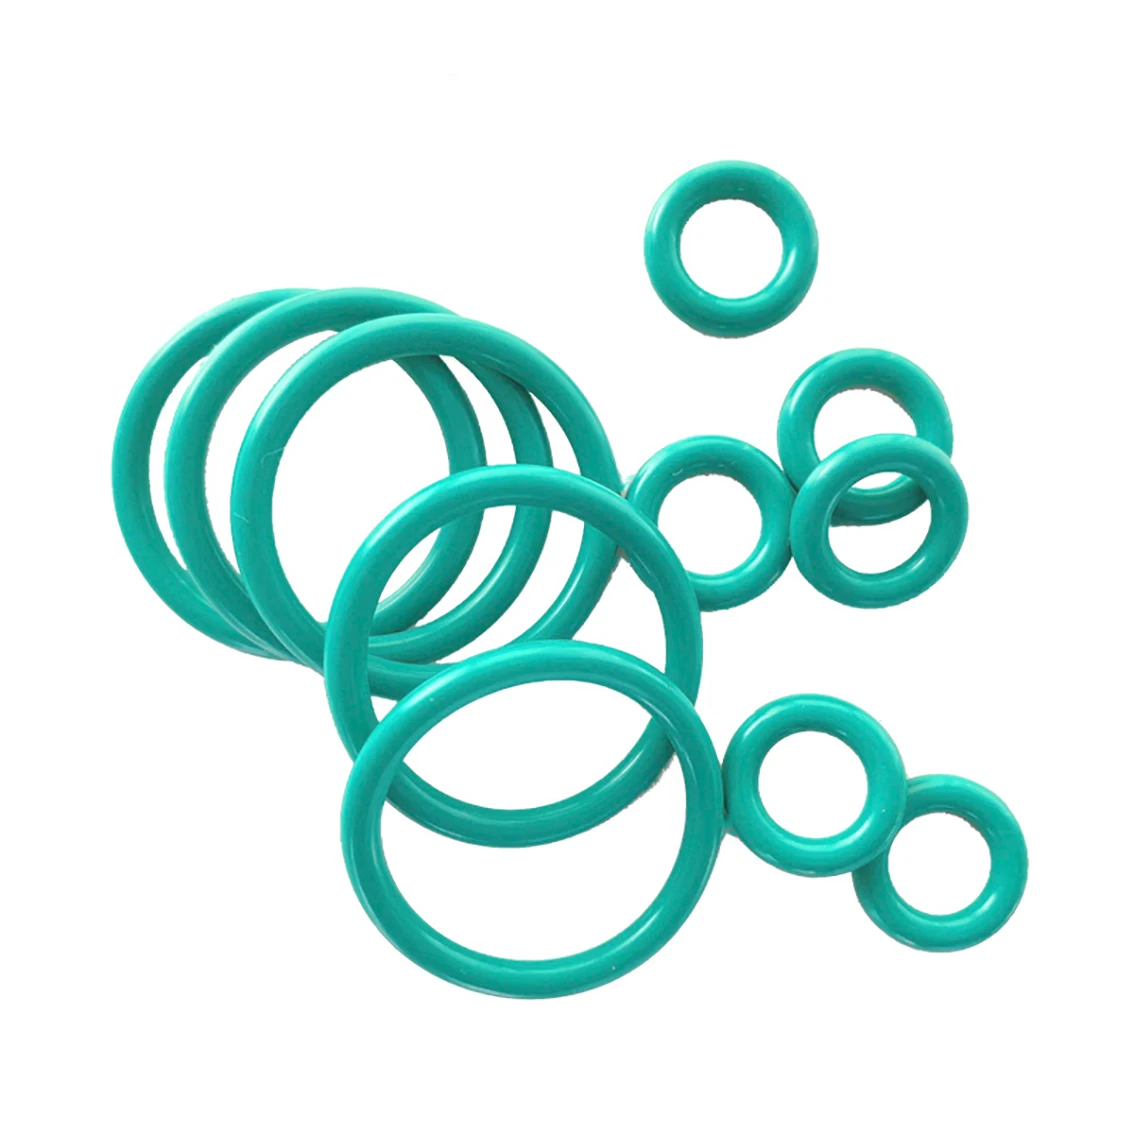 O.D= 3mm to 60mm Metric O-Rings Clear Silicone Rubber Seals Flat Washers Gaskets 